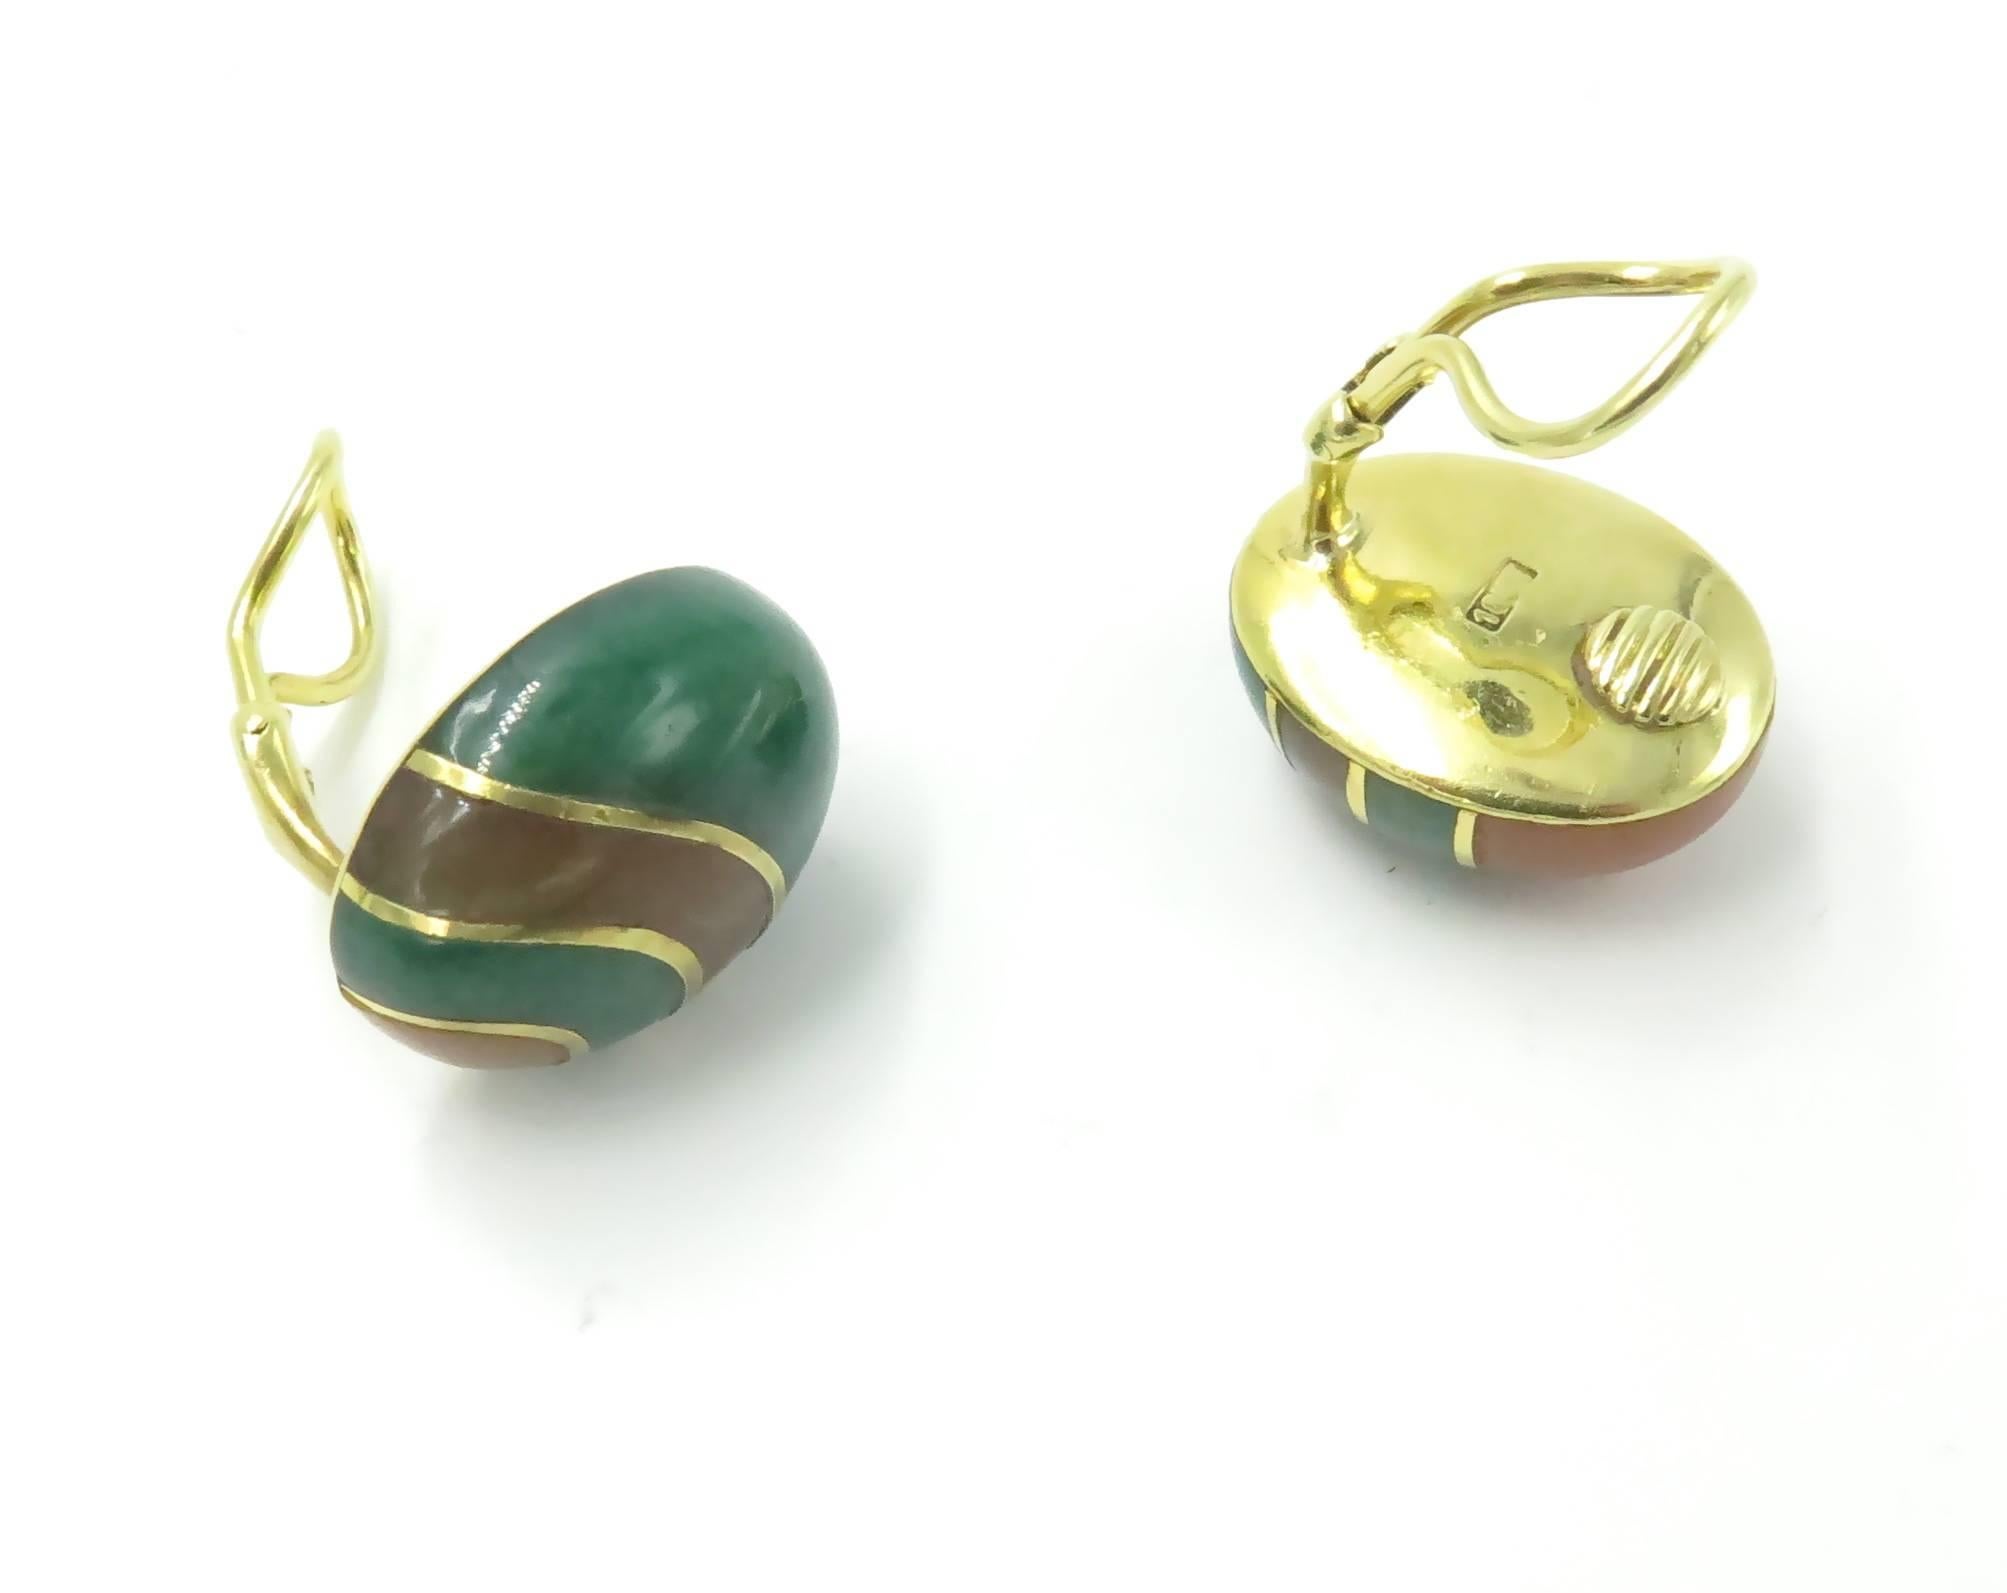 A pair of 18 karat yellow gold and hardstone earrings. Angela Cummings for Tiffany & Co. Circa 1980. Of oval outline, set in opposing swirled patterns of green and orange hardstone. Length is 3/4 inches. Gross weight is approximately 19.1 grams.